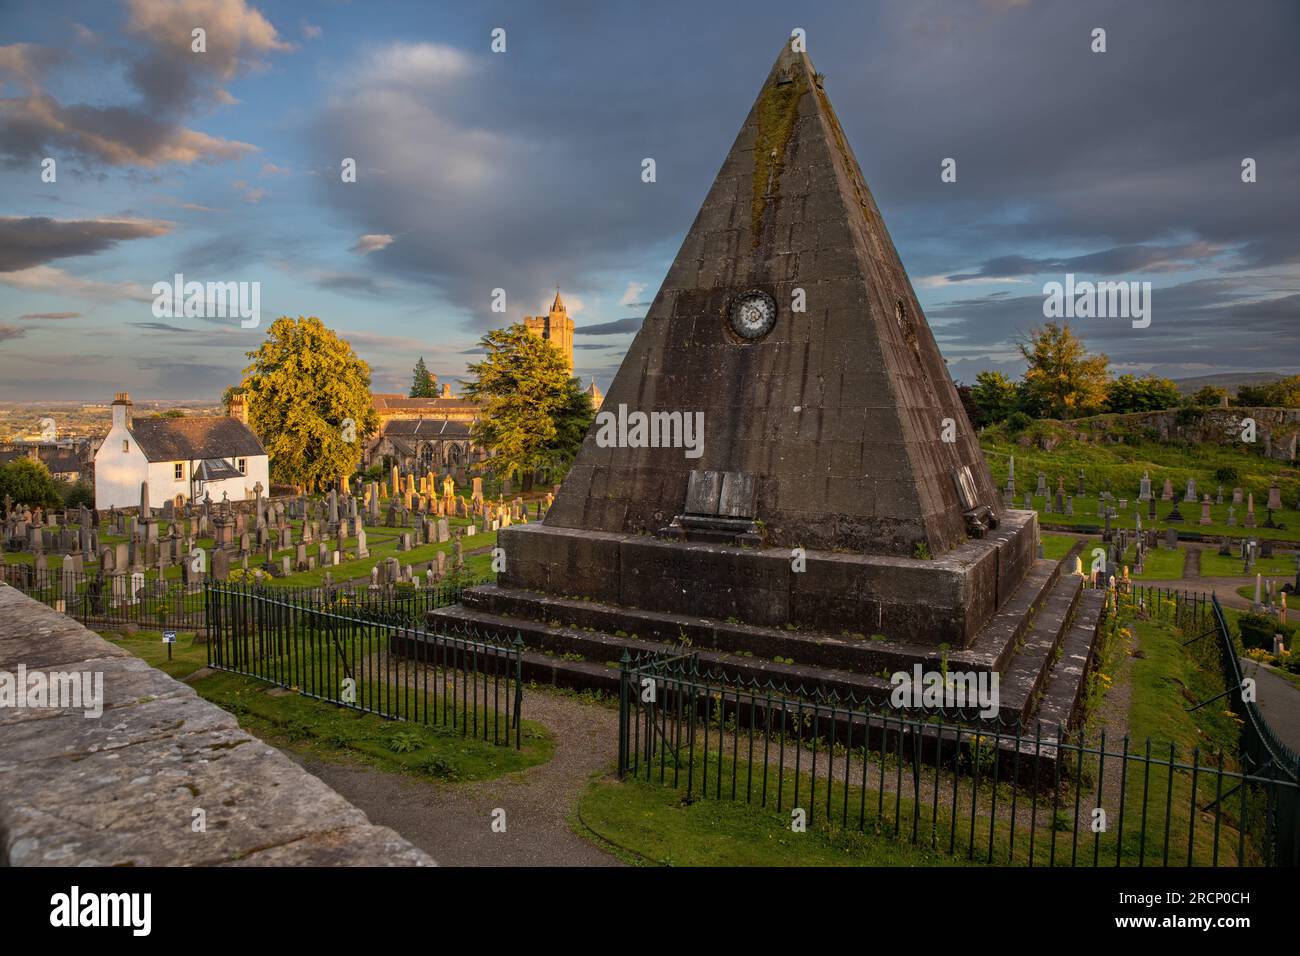 The Star Pyramid in the Old Town Cemetery at the Church of the Holy Rude on a summers evening Stirling, Scotland, UK Stock Photo